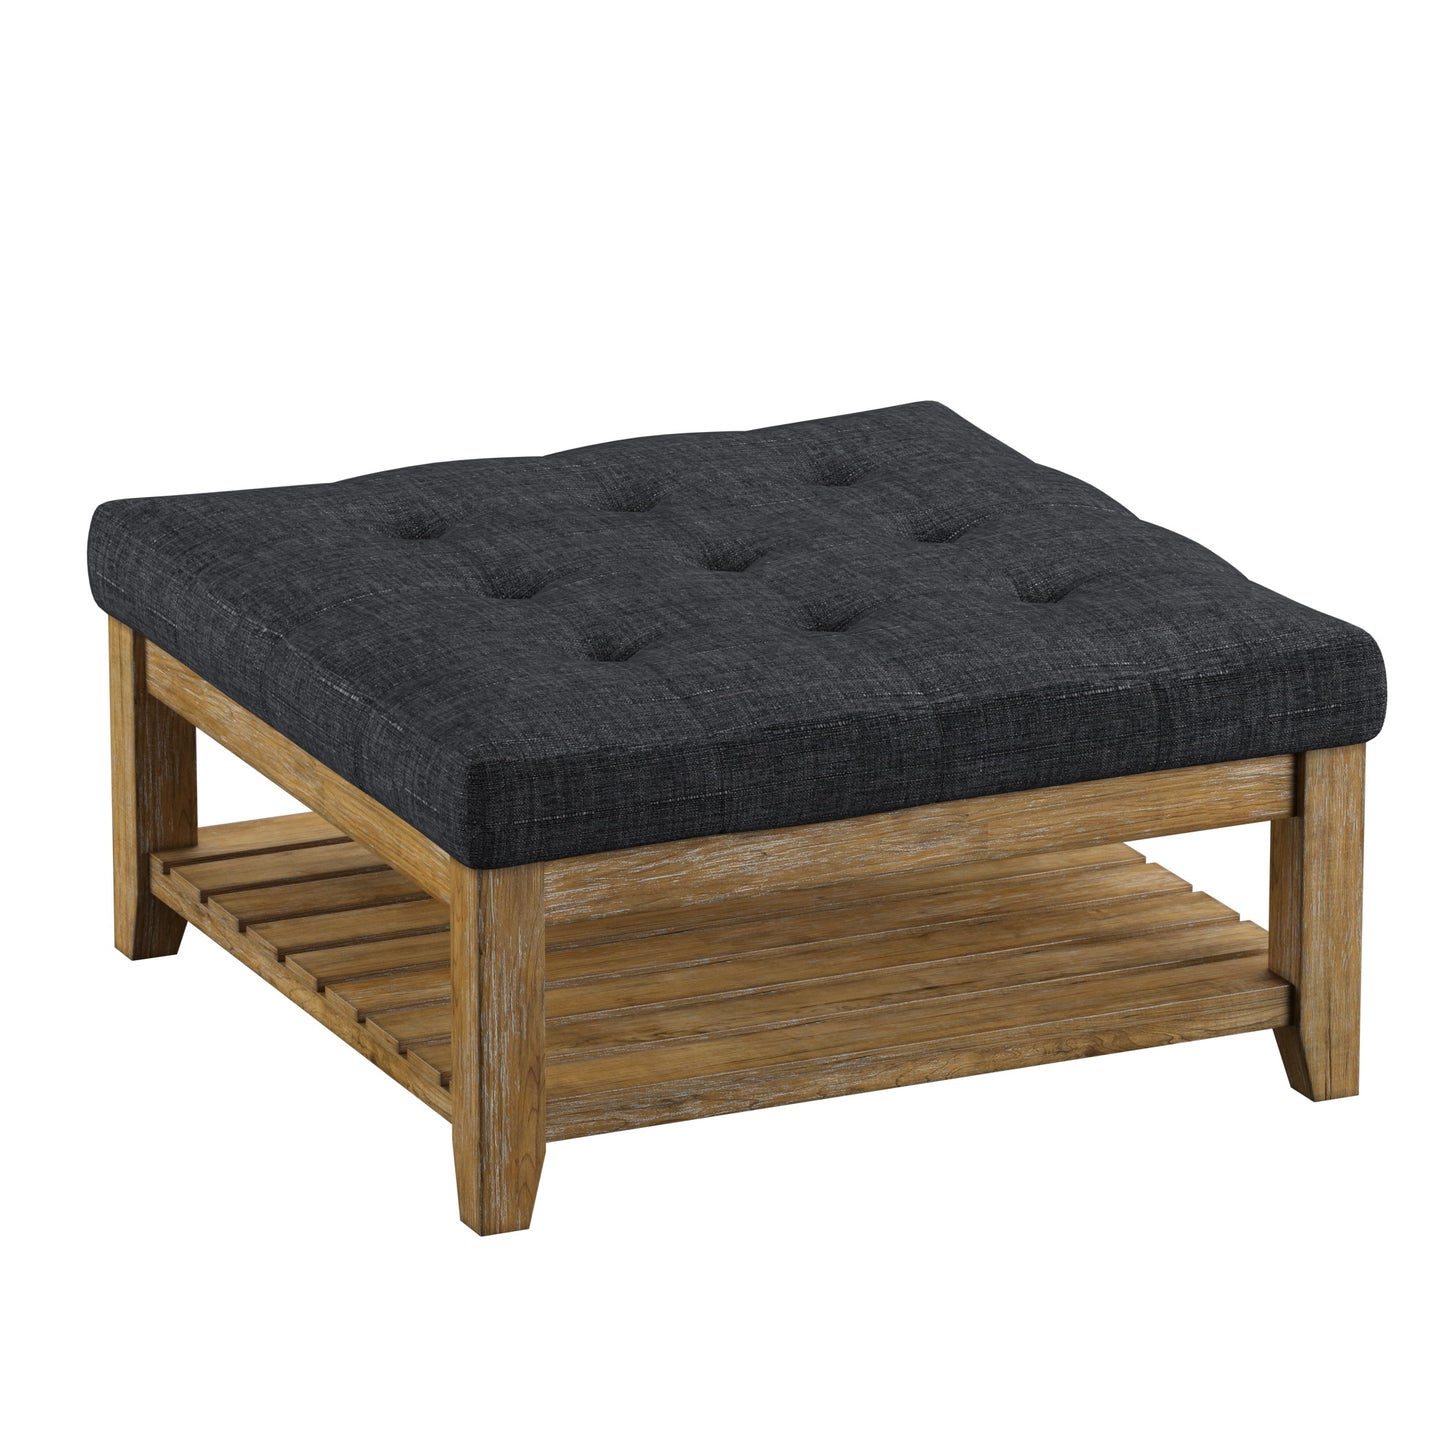 Pine Planked Storage Ottoman Coffee Table - Dark Grey Linen, Dimpled Tufted